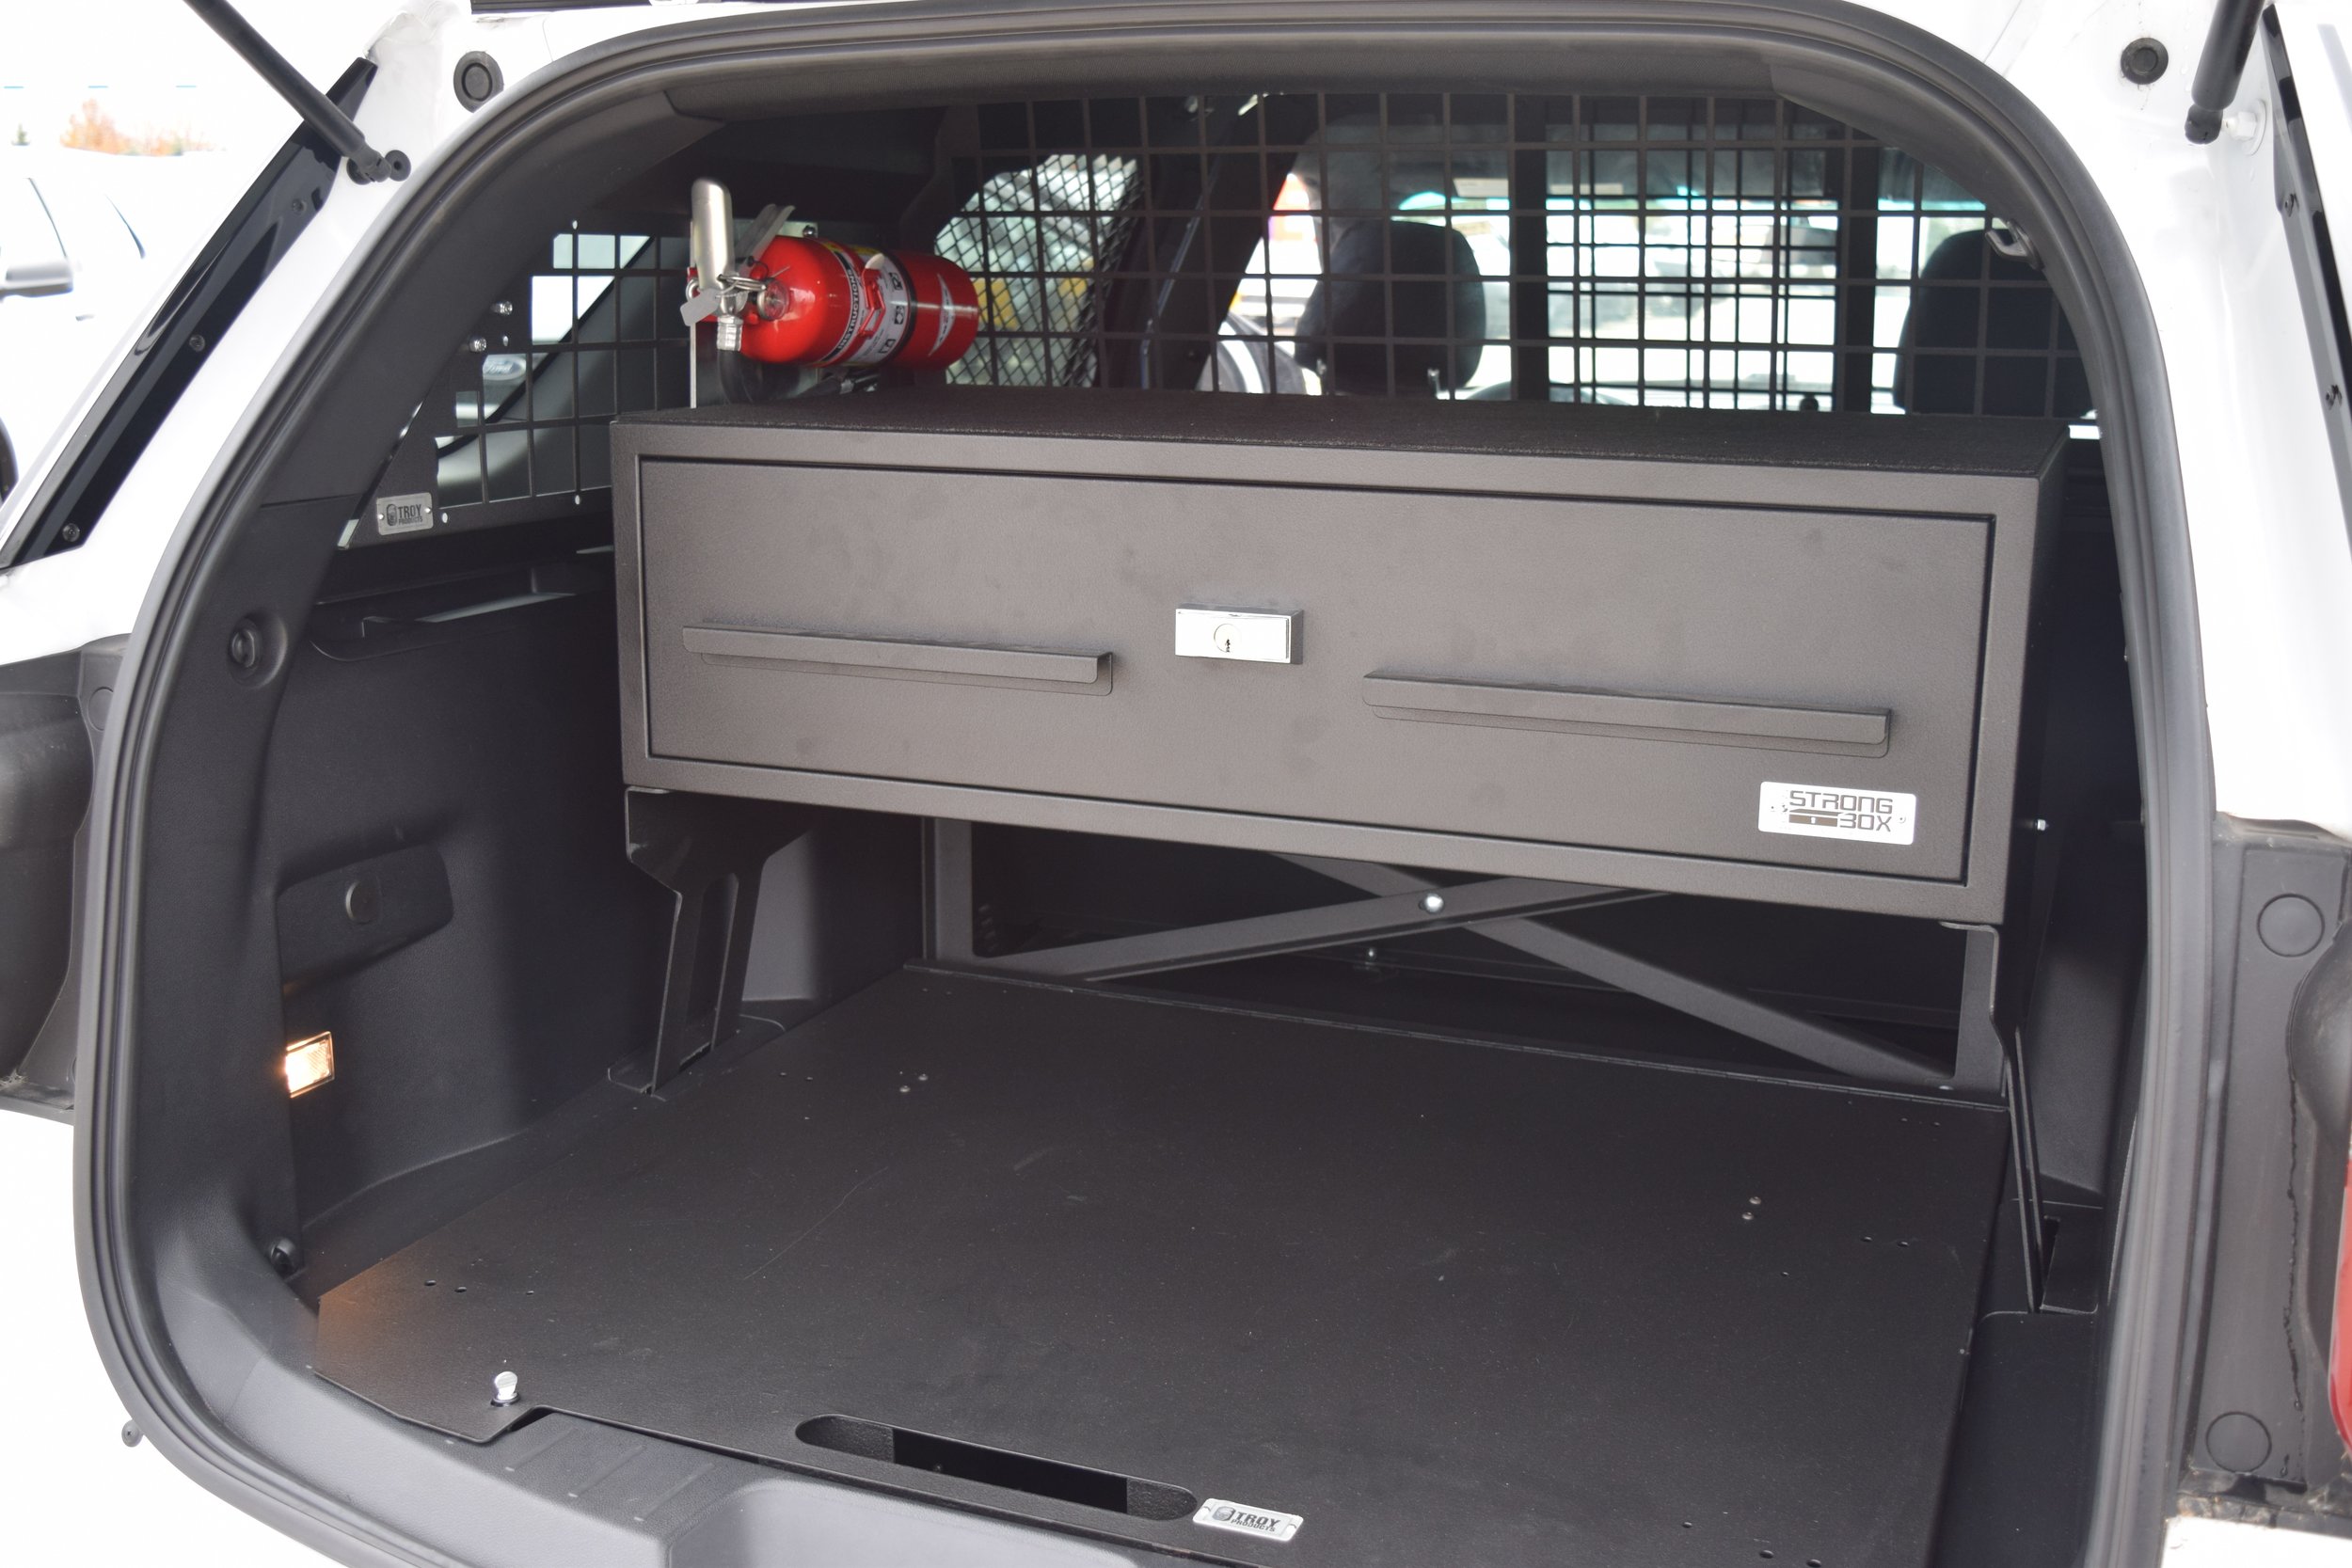 Ford explorer rear storage closed view